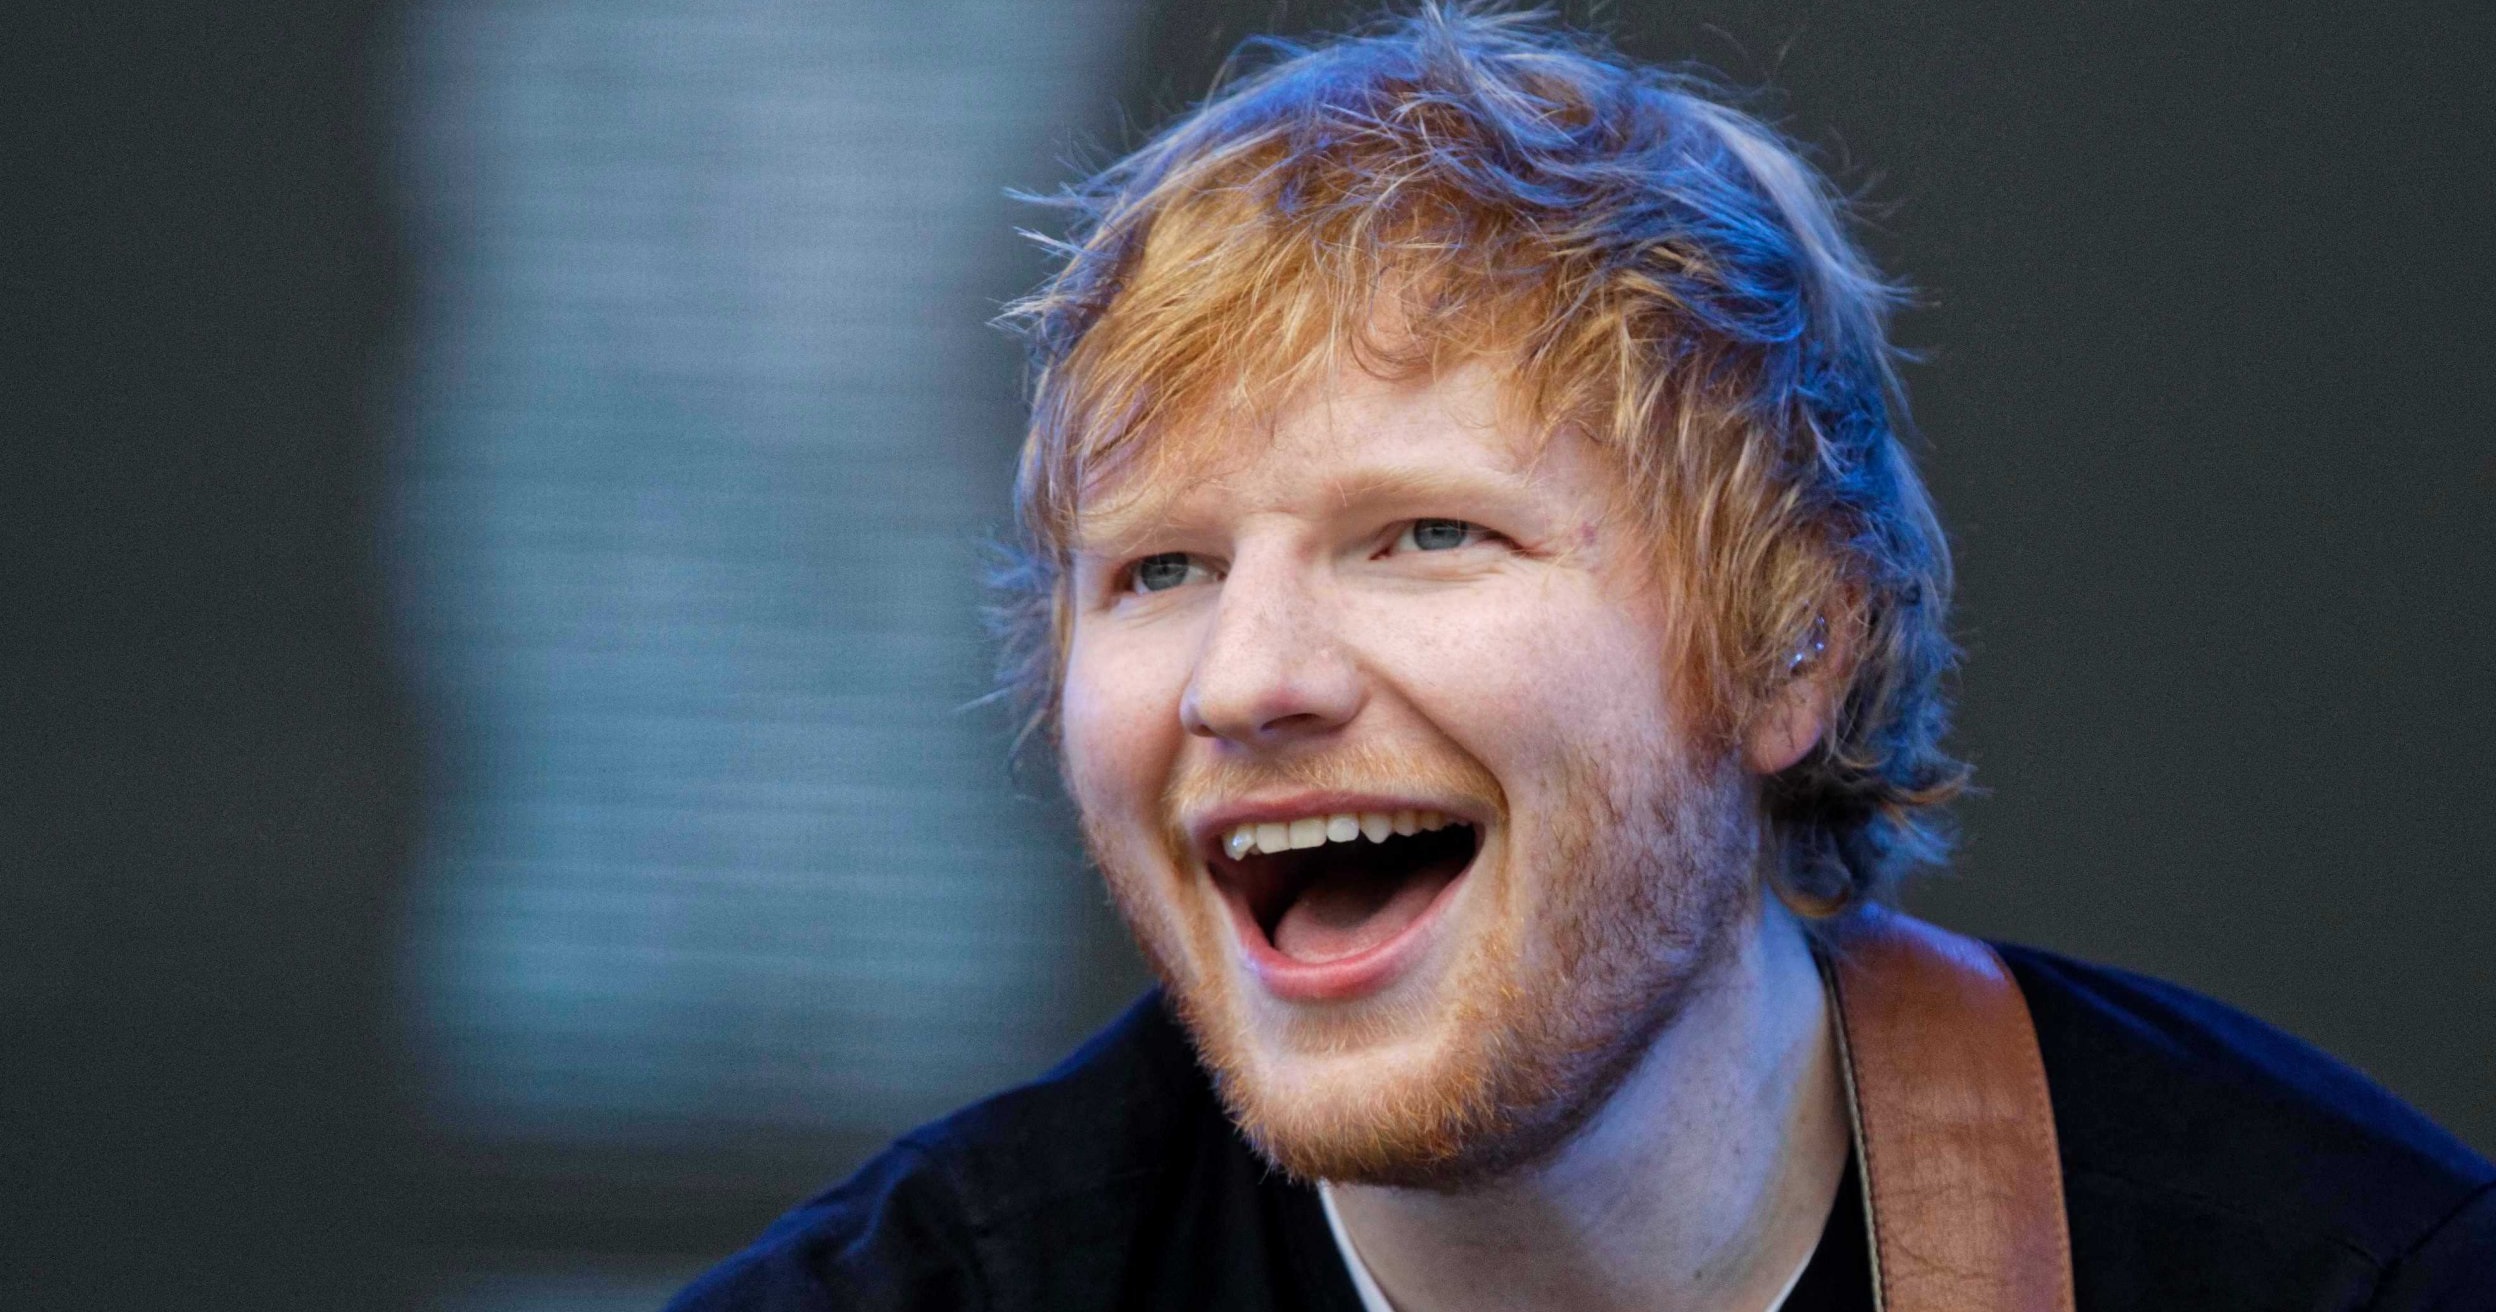 Ed Sheeran’s Latest Tour Becomes The Highest Grossing Tour of All Time!